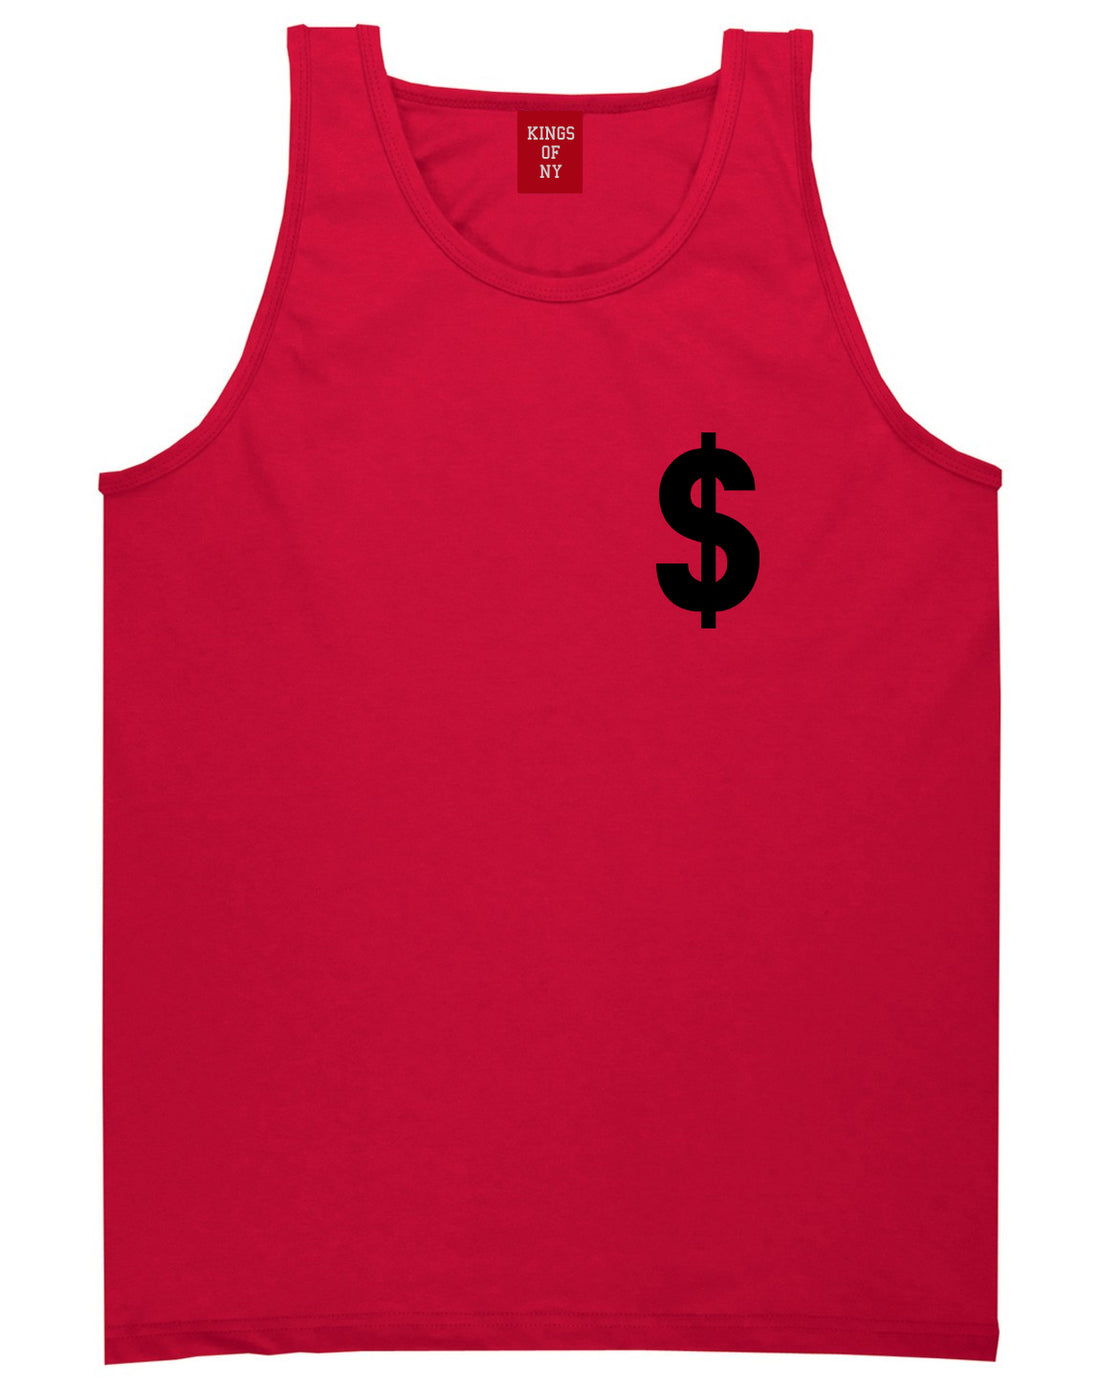 Dollar_Sign_Simple_Chest Mens Red Tank Top Shirt by Kings Of NY